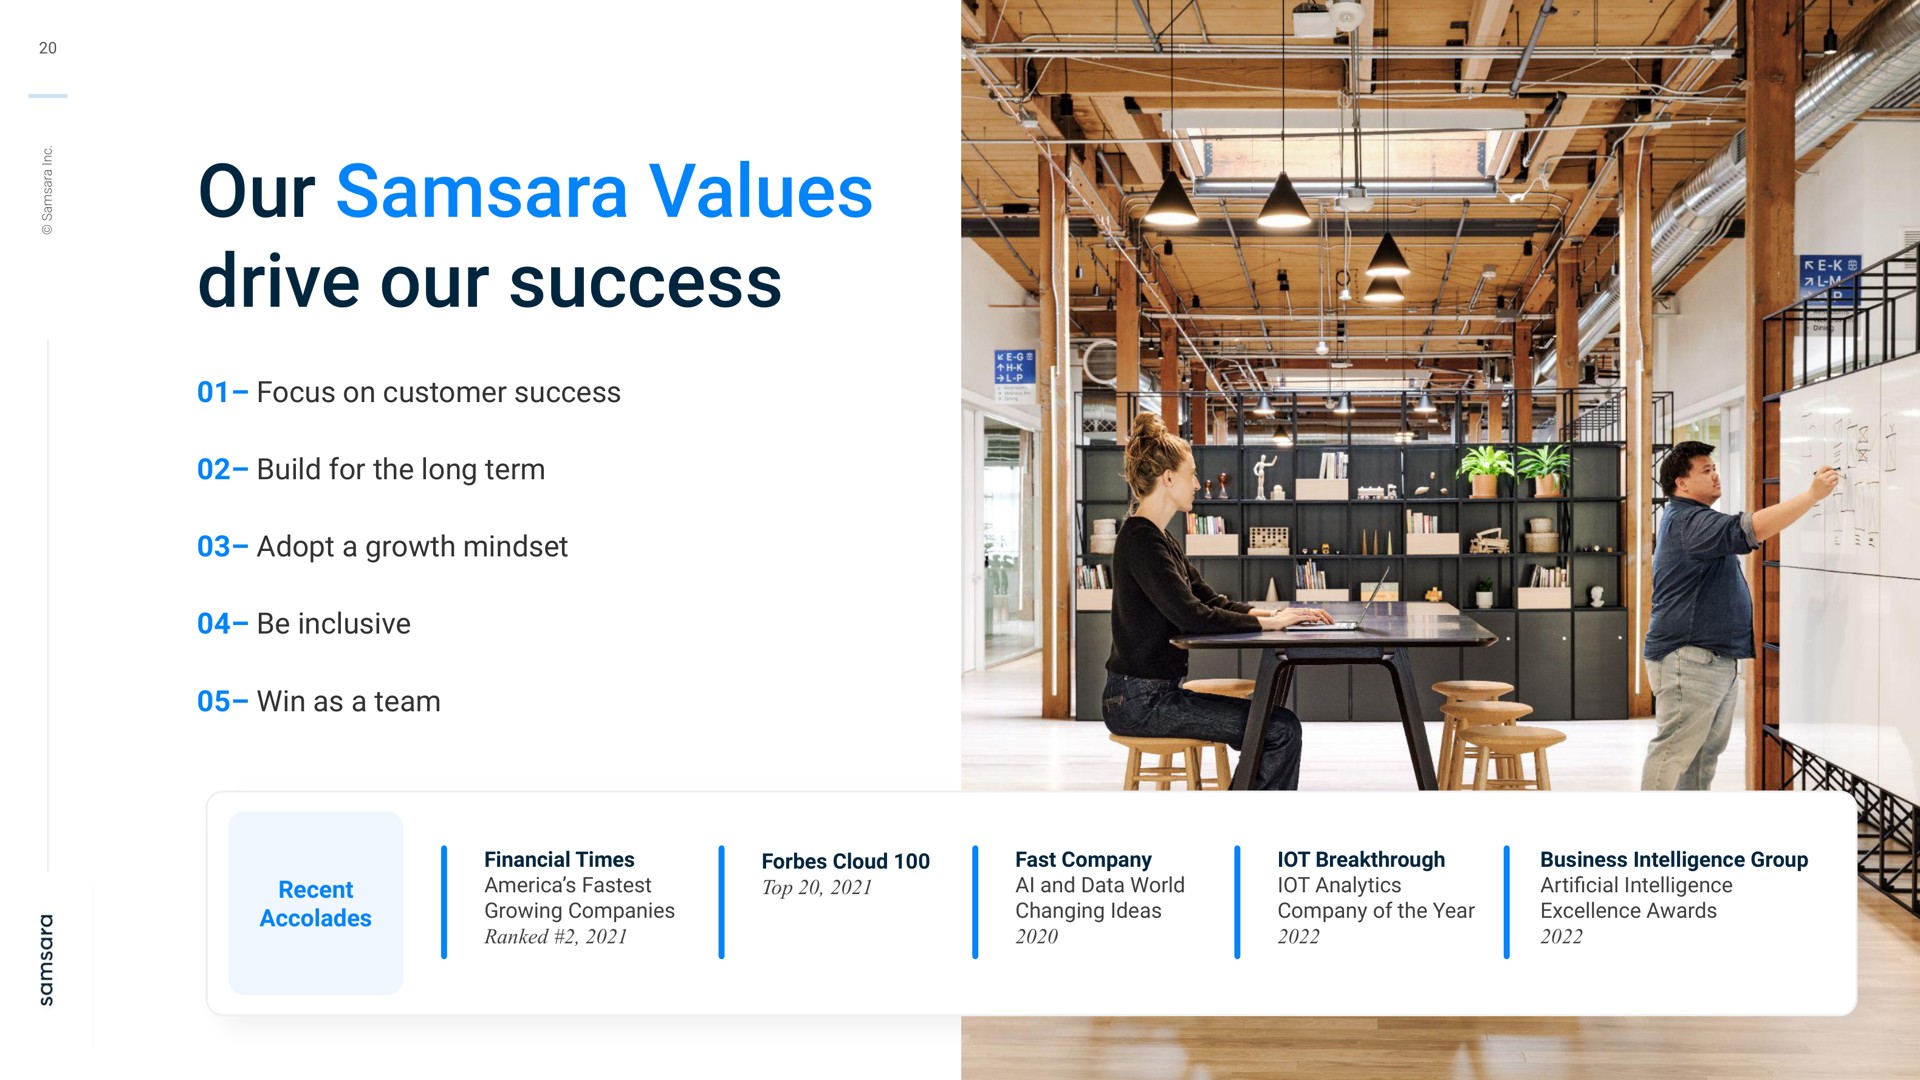 our samsara values drive our success focus on customer success build for the long term adopt a growth be inclusive win as a team recent accolades financial times growing companies ranked cloud top fast company and data world changing ideas breakthrough analytics company of the year business intelligence group intelligence excellence awards | Samsara